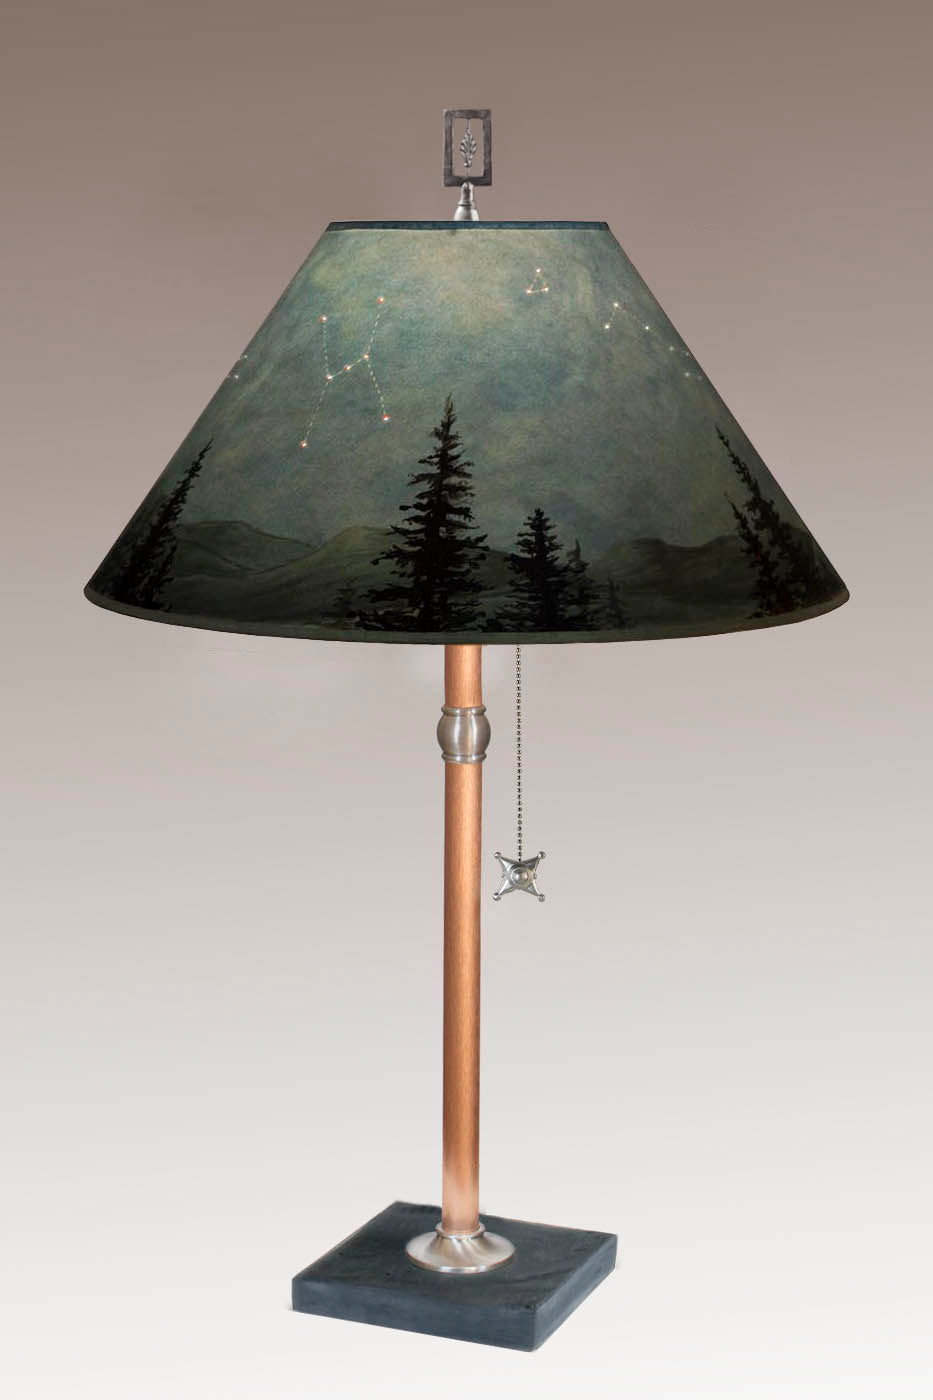 Janna Ugone &amp; Co Table Lamp Copper Table Lamp with Large Conical Shade in Midnight Sky